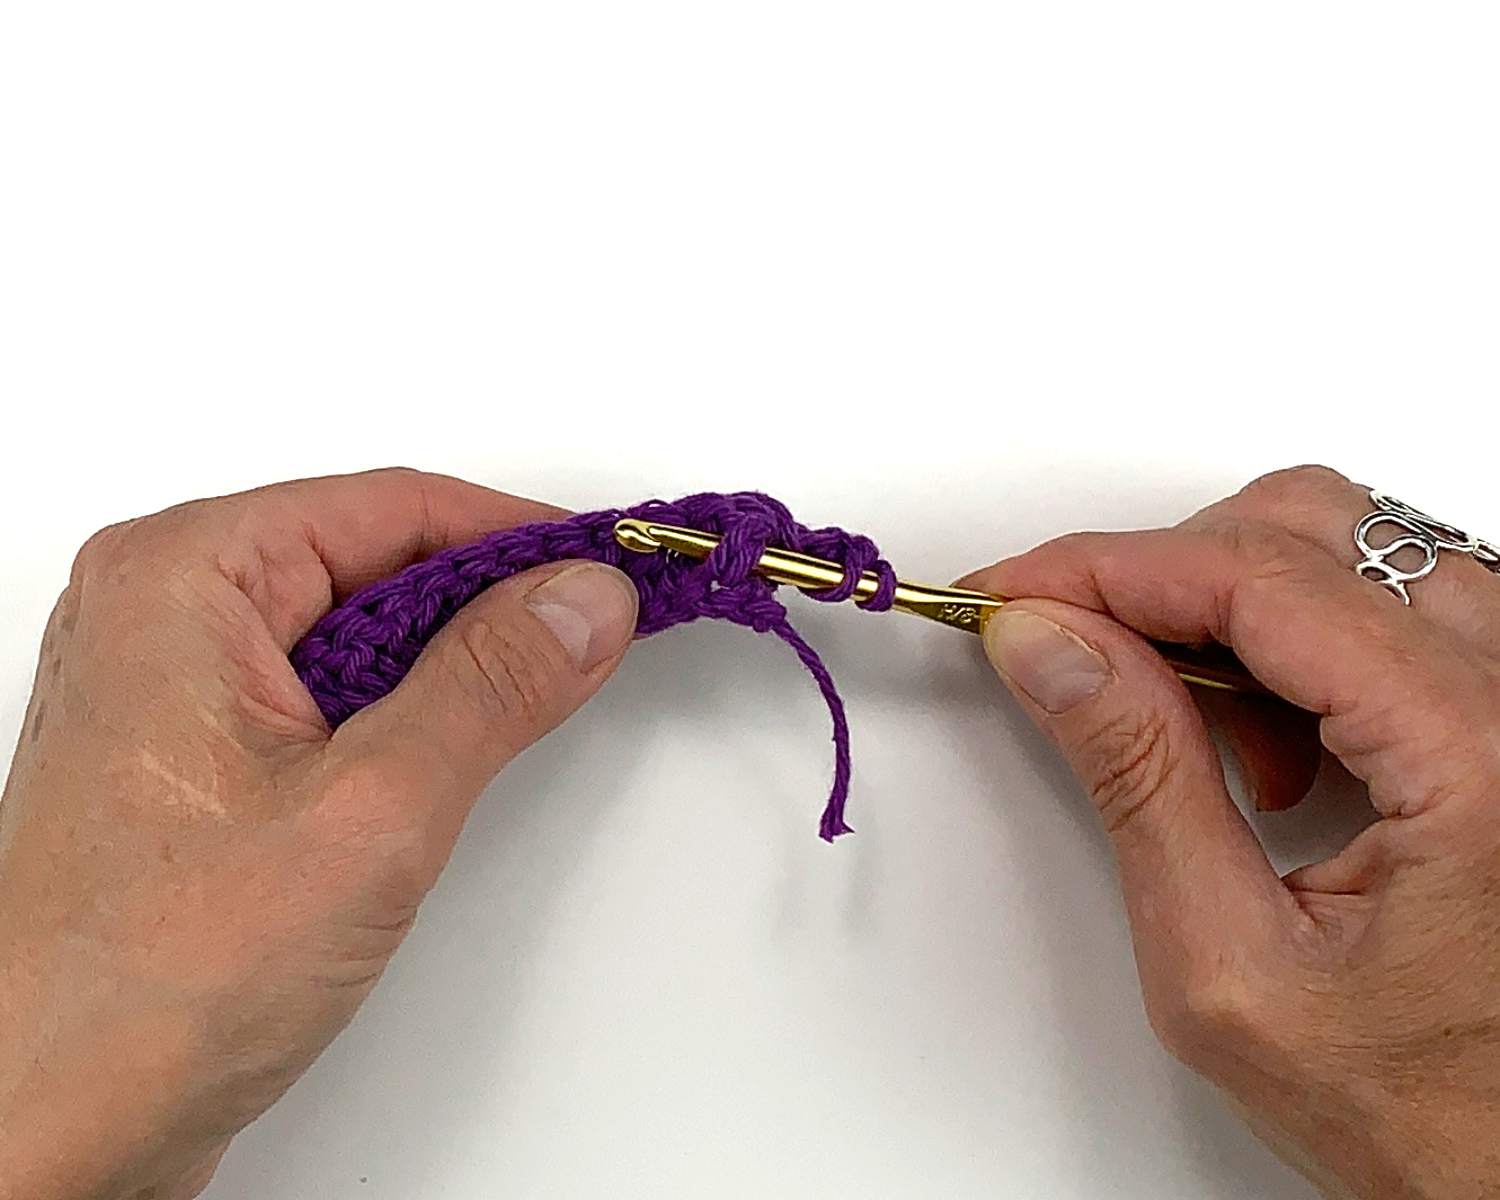 image of hands moving crochet hook under a double stitch